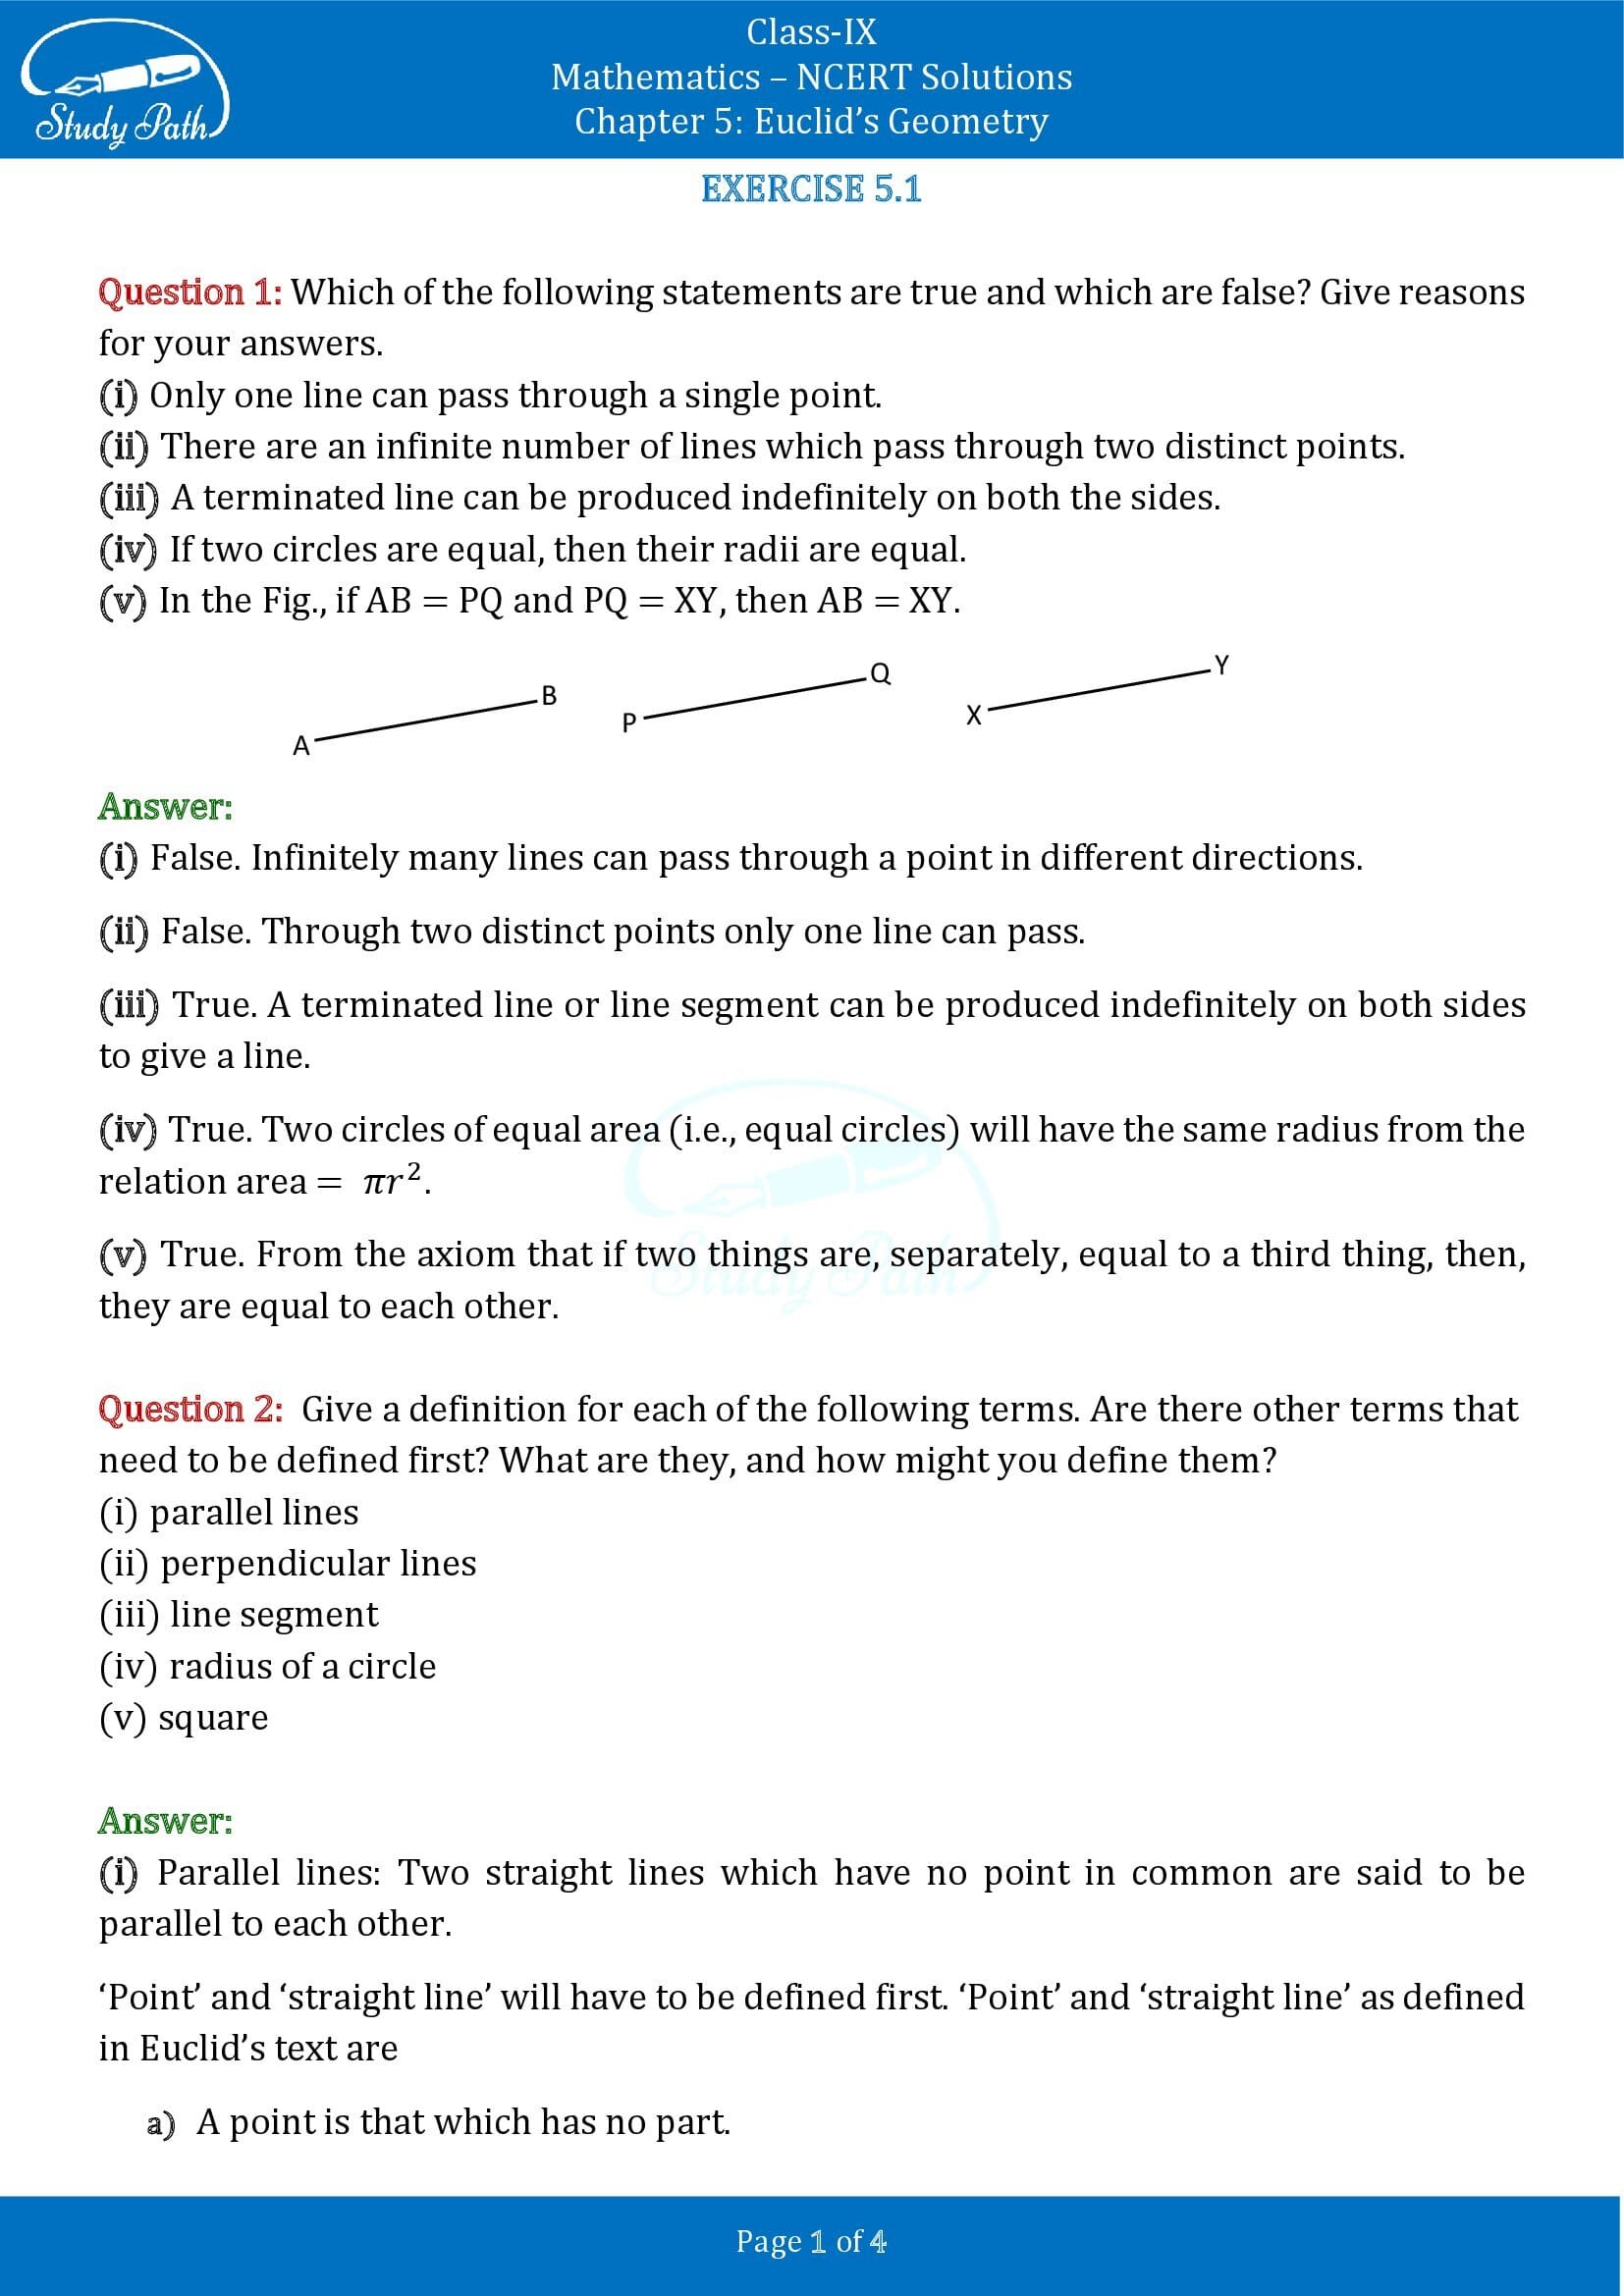 NCERT Solutions for Class 9 Maths Chapter 5 Euclids Geometry Exercise 5.1 00001